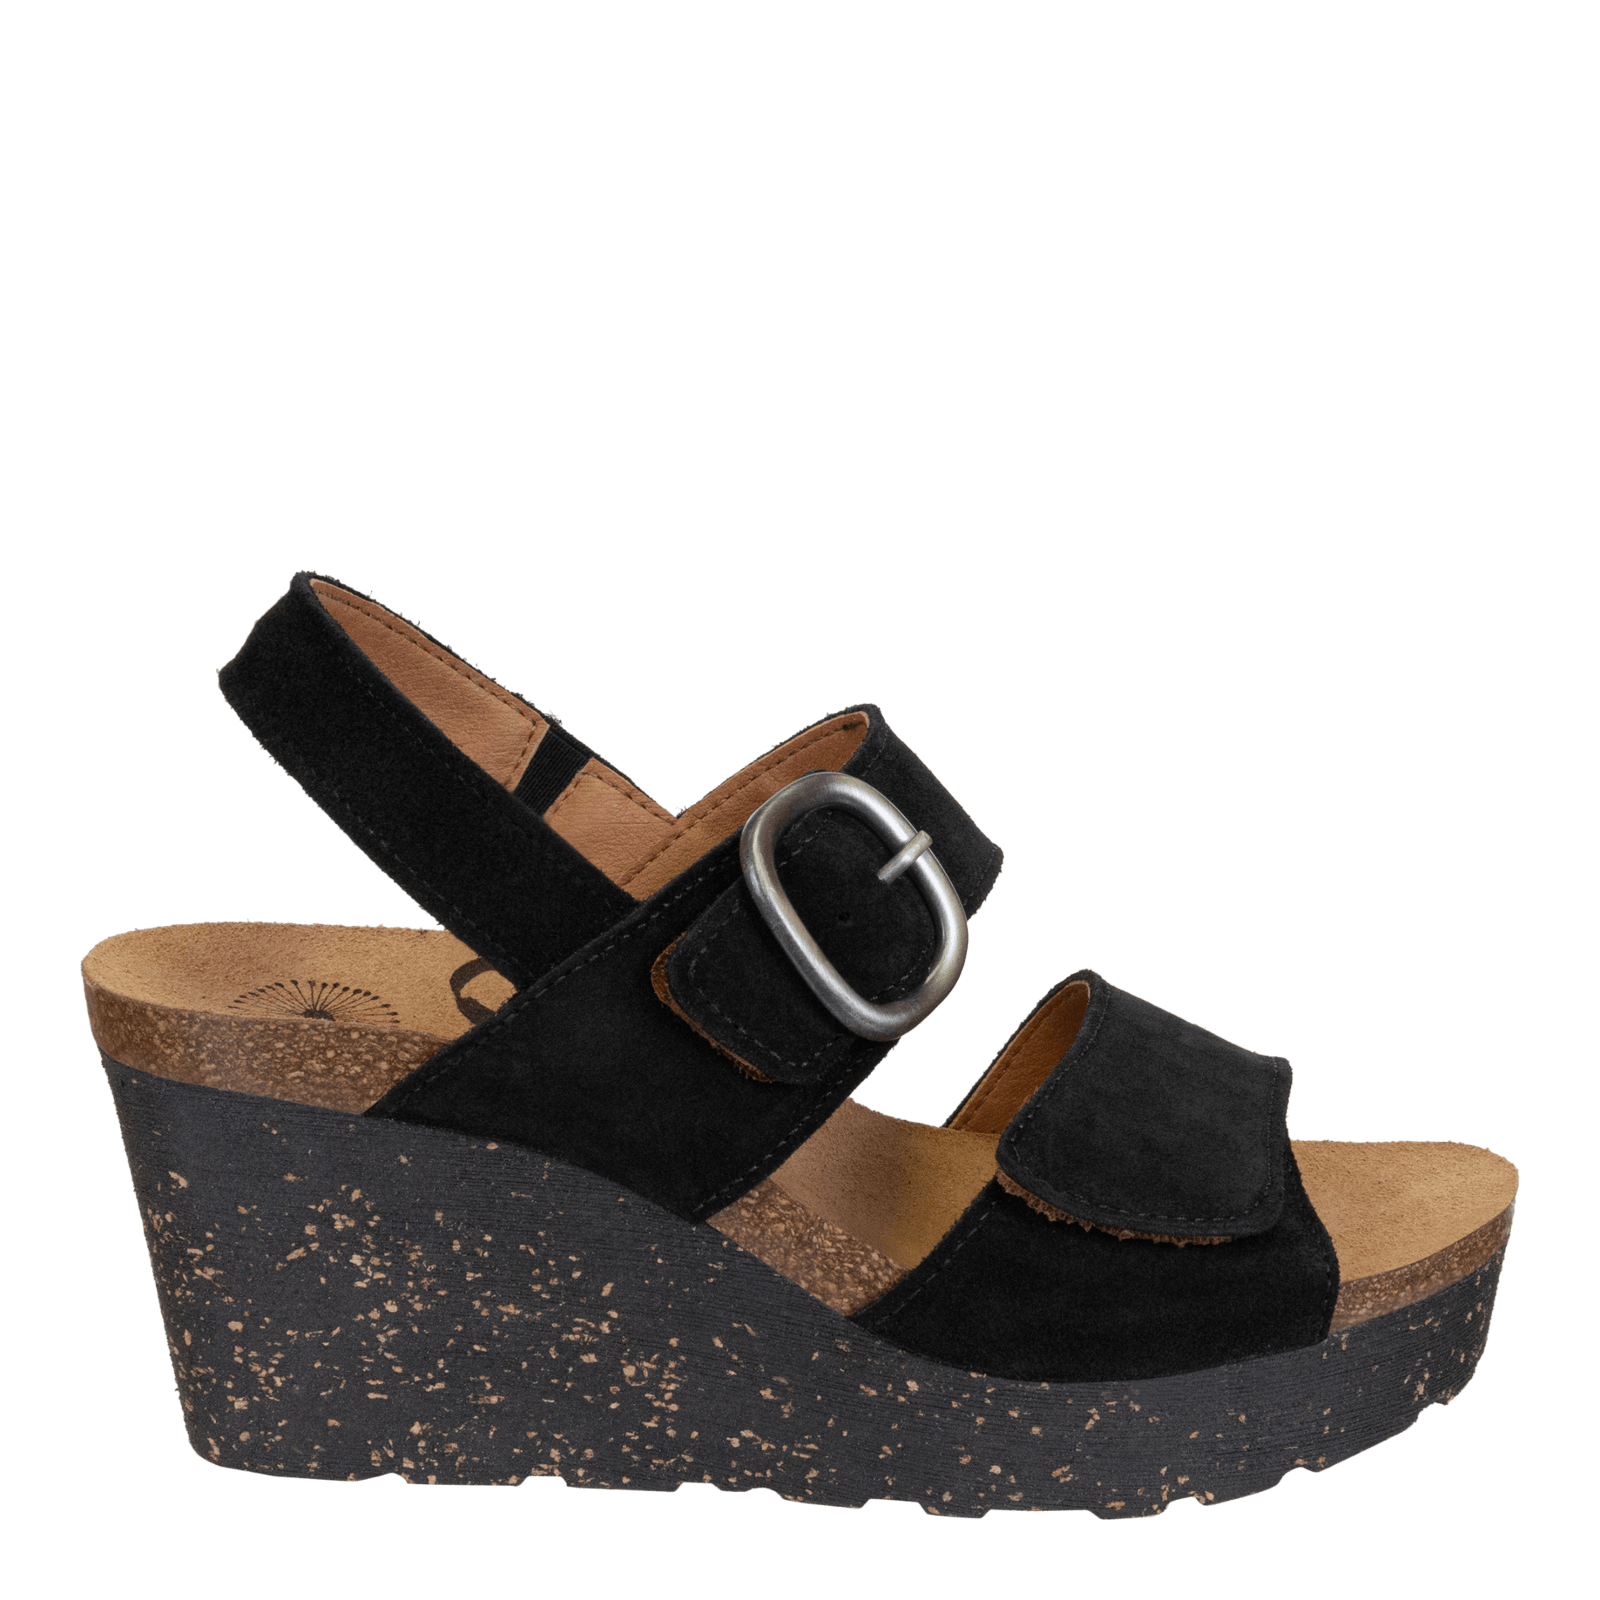 Buy Women's Wedges From Top Brands At Awesome Prices Online | LBB